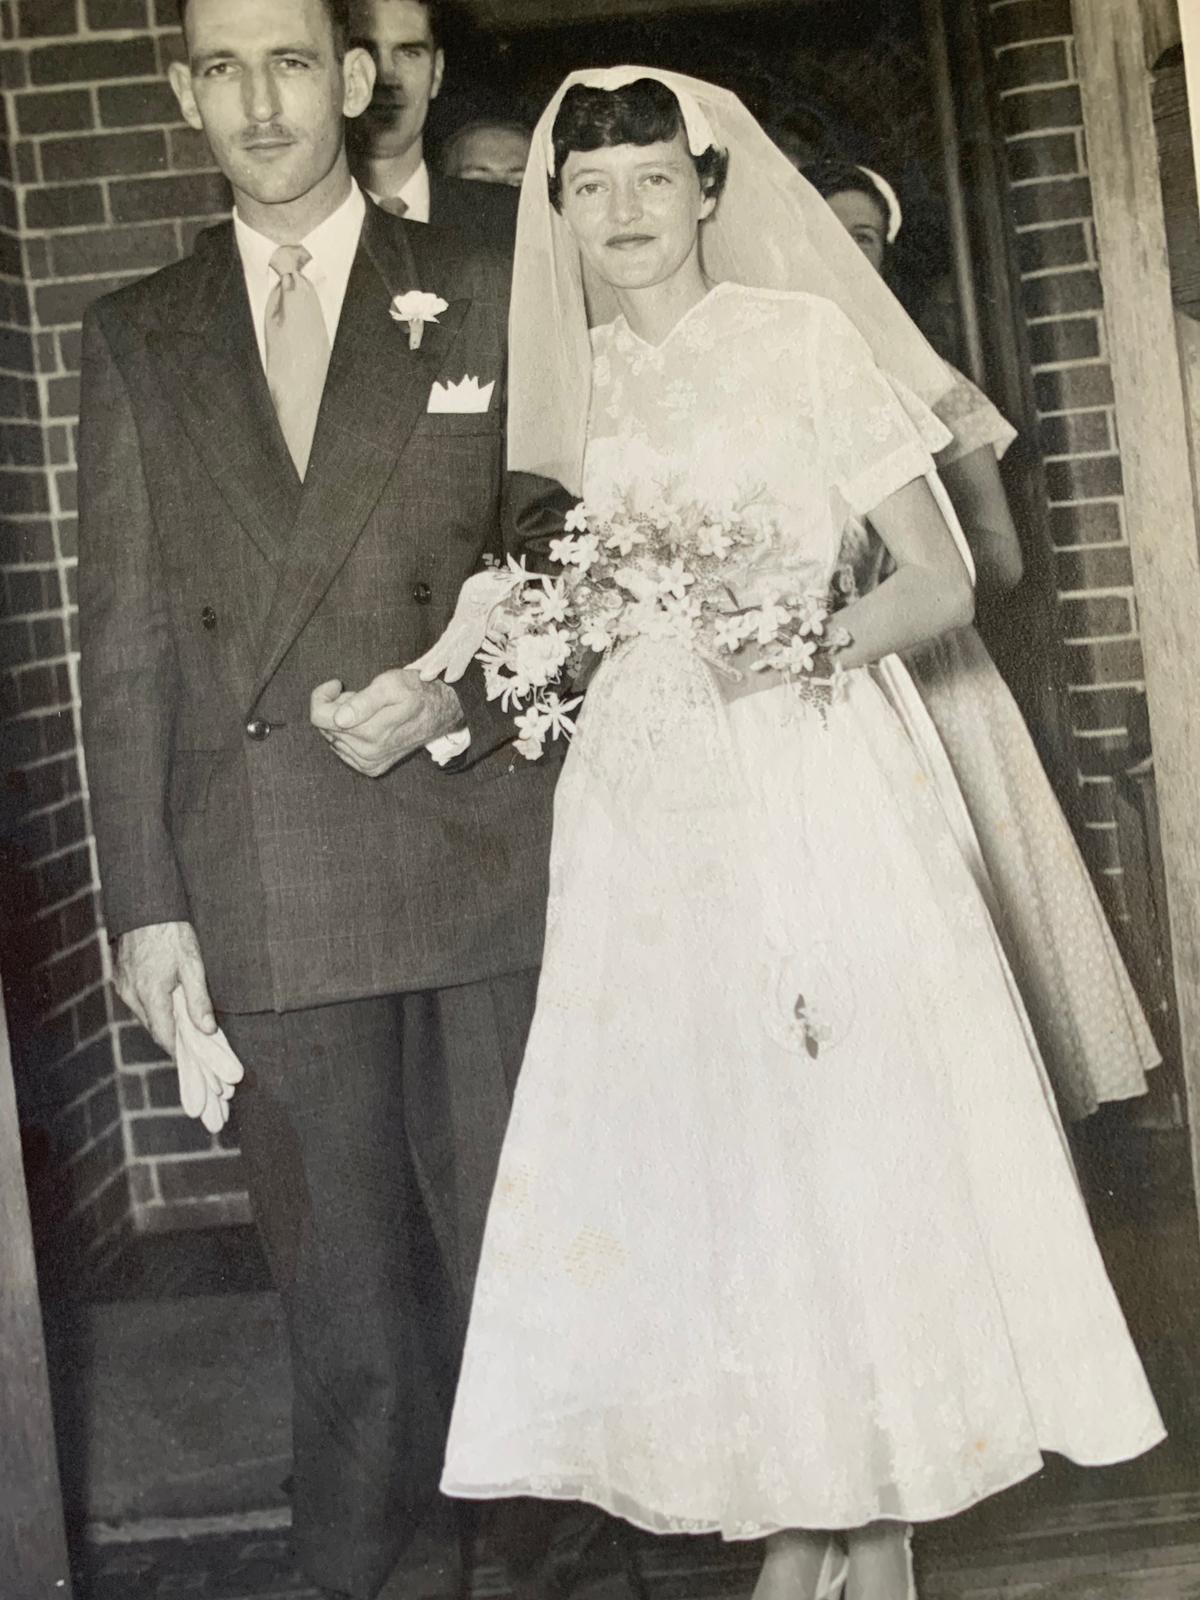 Val and Ian Fell on their wedding day in 1955. (Courtesy of Val Fell)